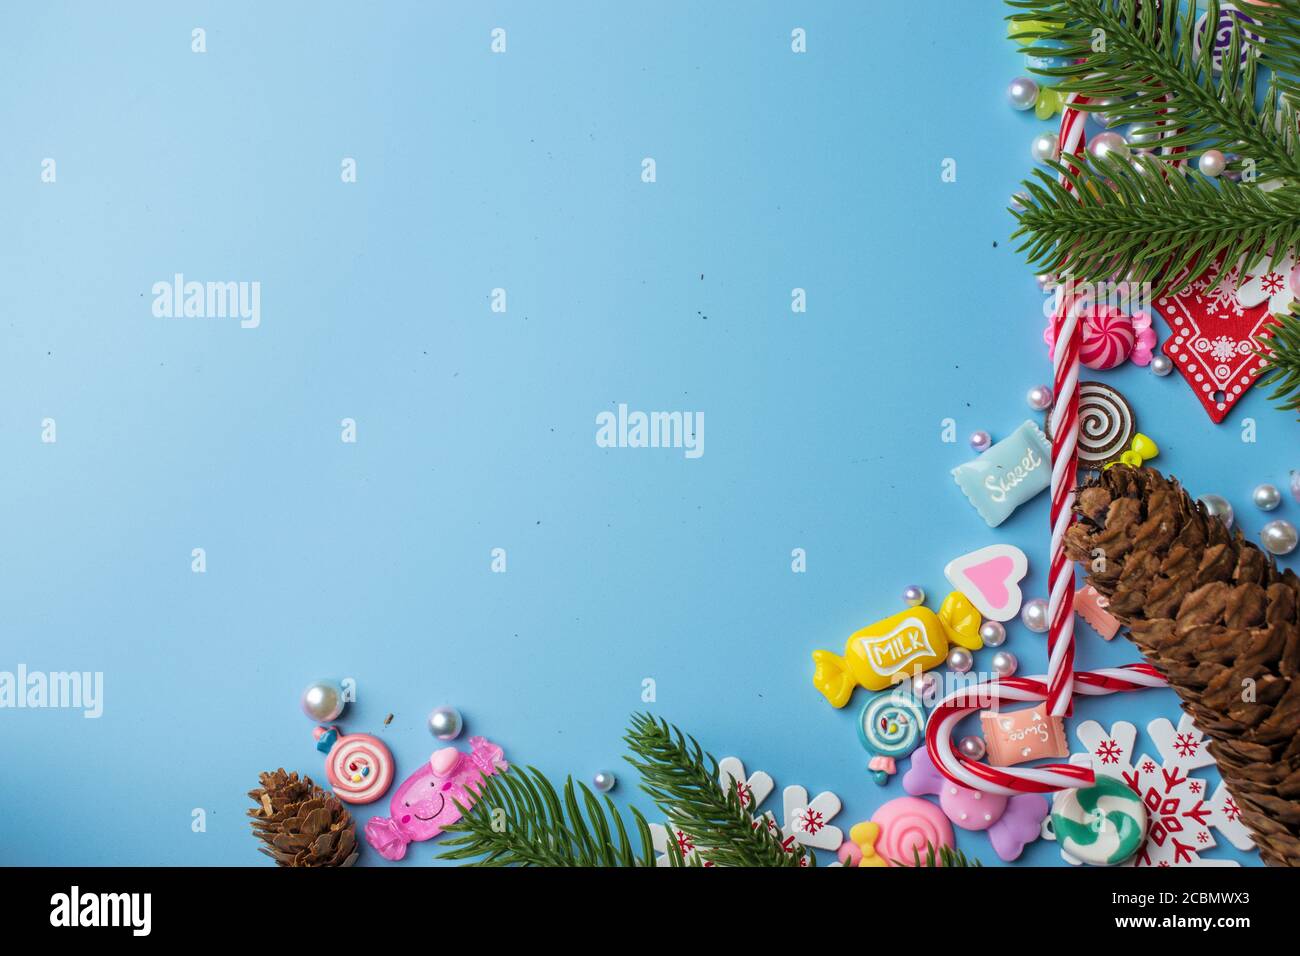 New Year celebration flat lay design with copy space. Blue background top view. Christmas season concept template. Xmas Holidays Stock Photo